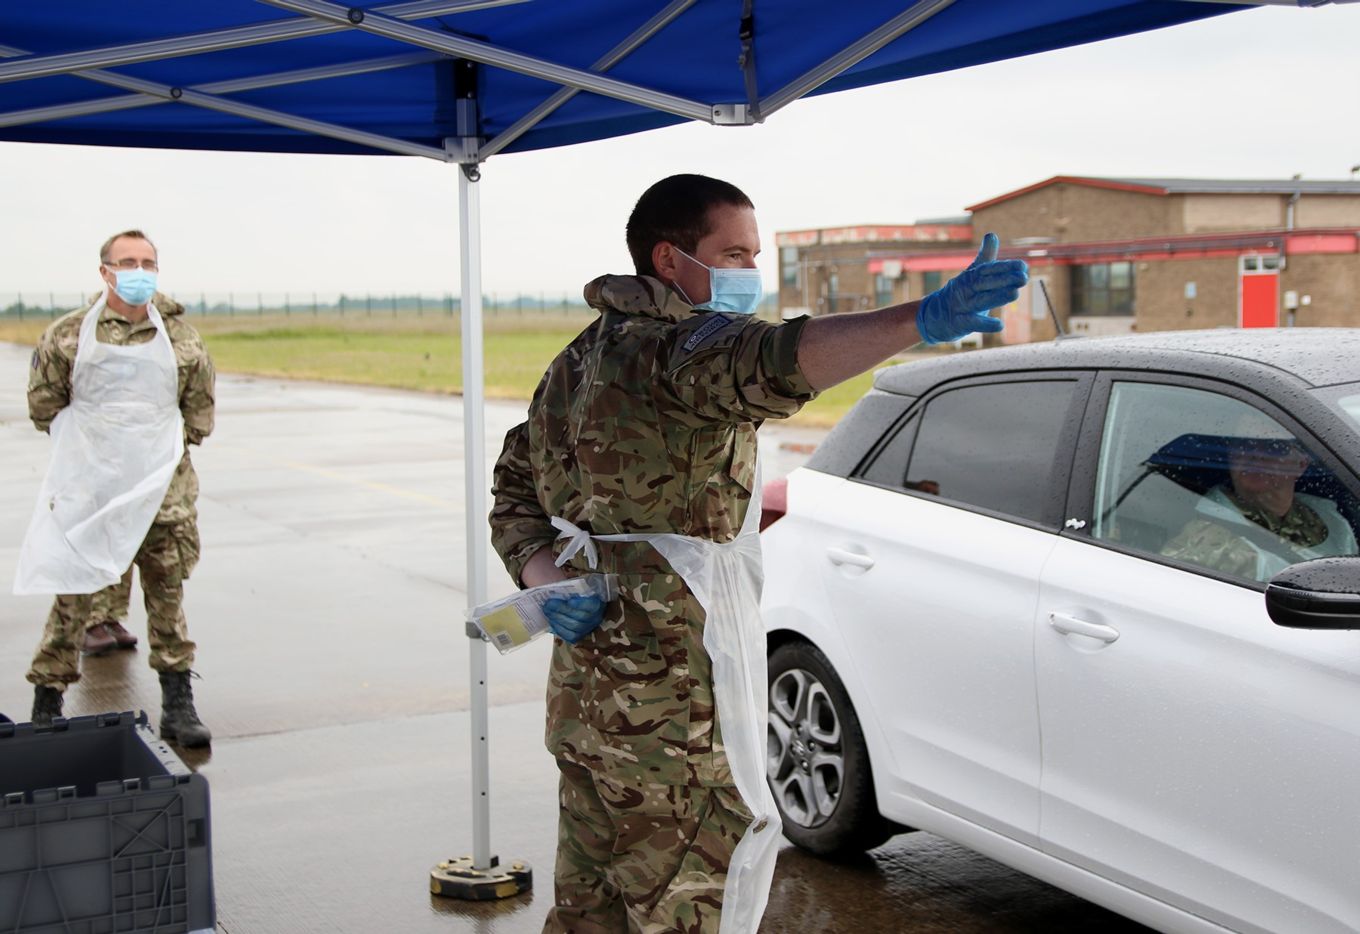 A member of the team directs a vehicle during a run through